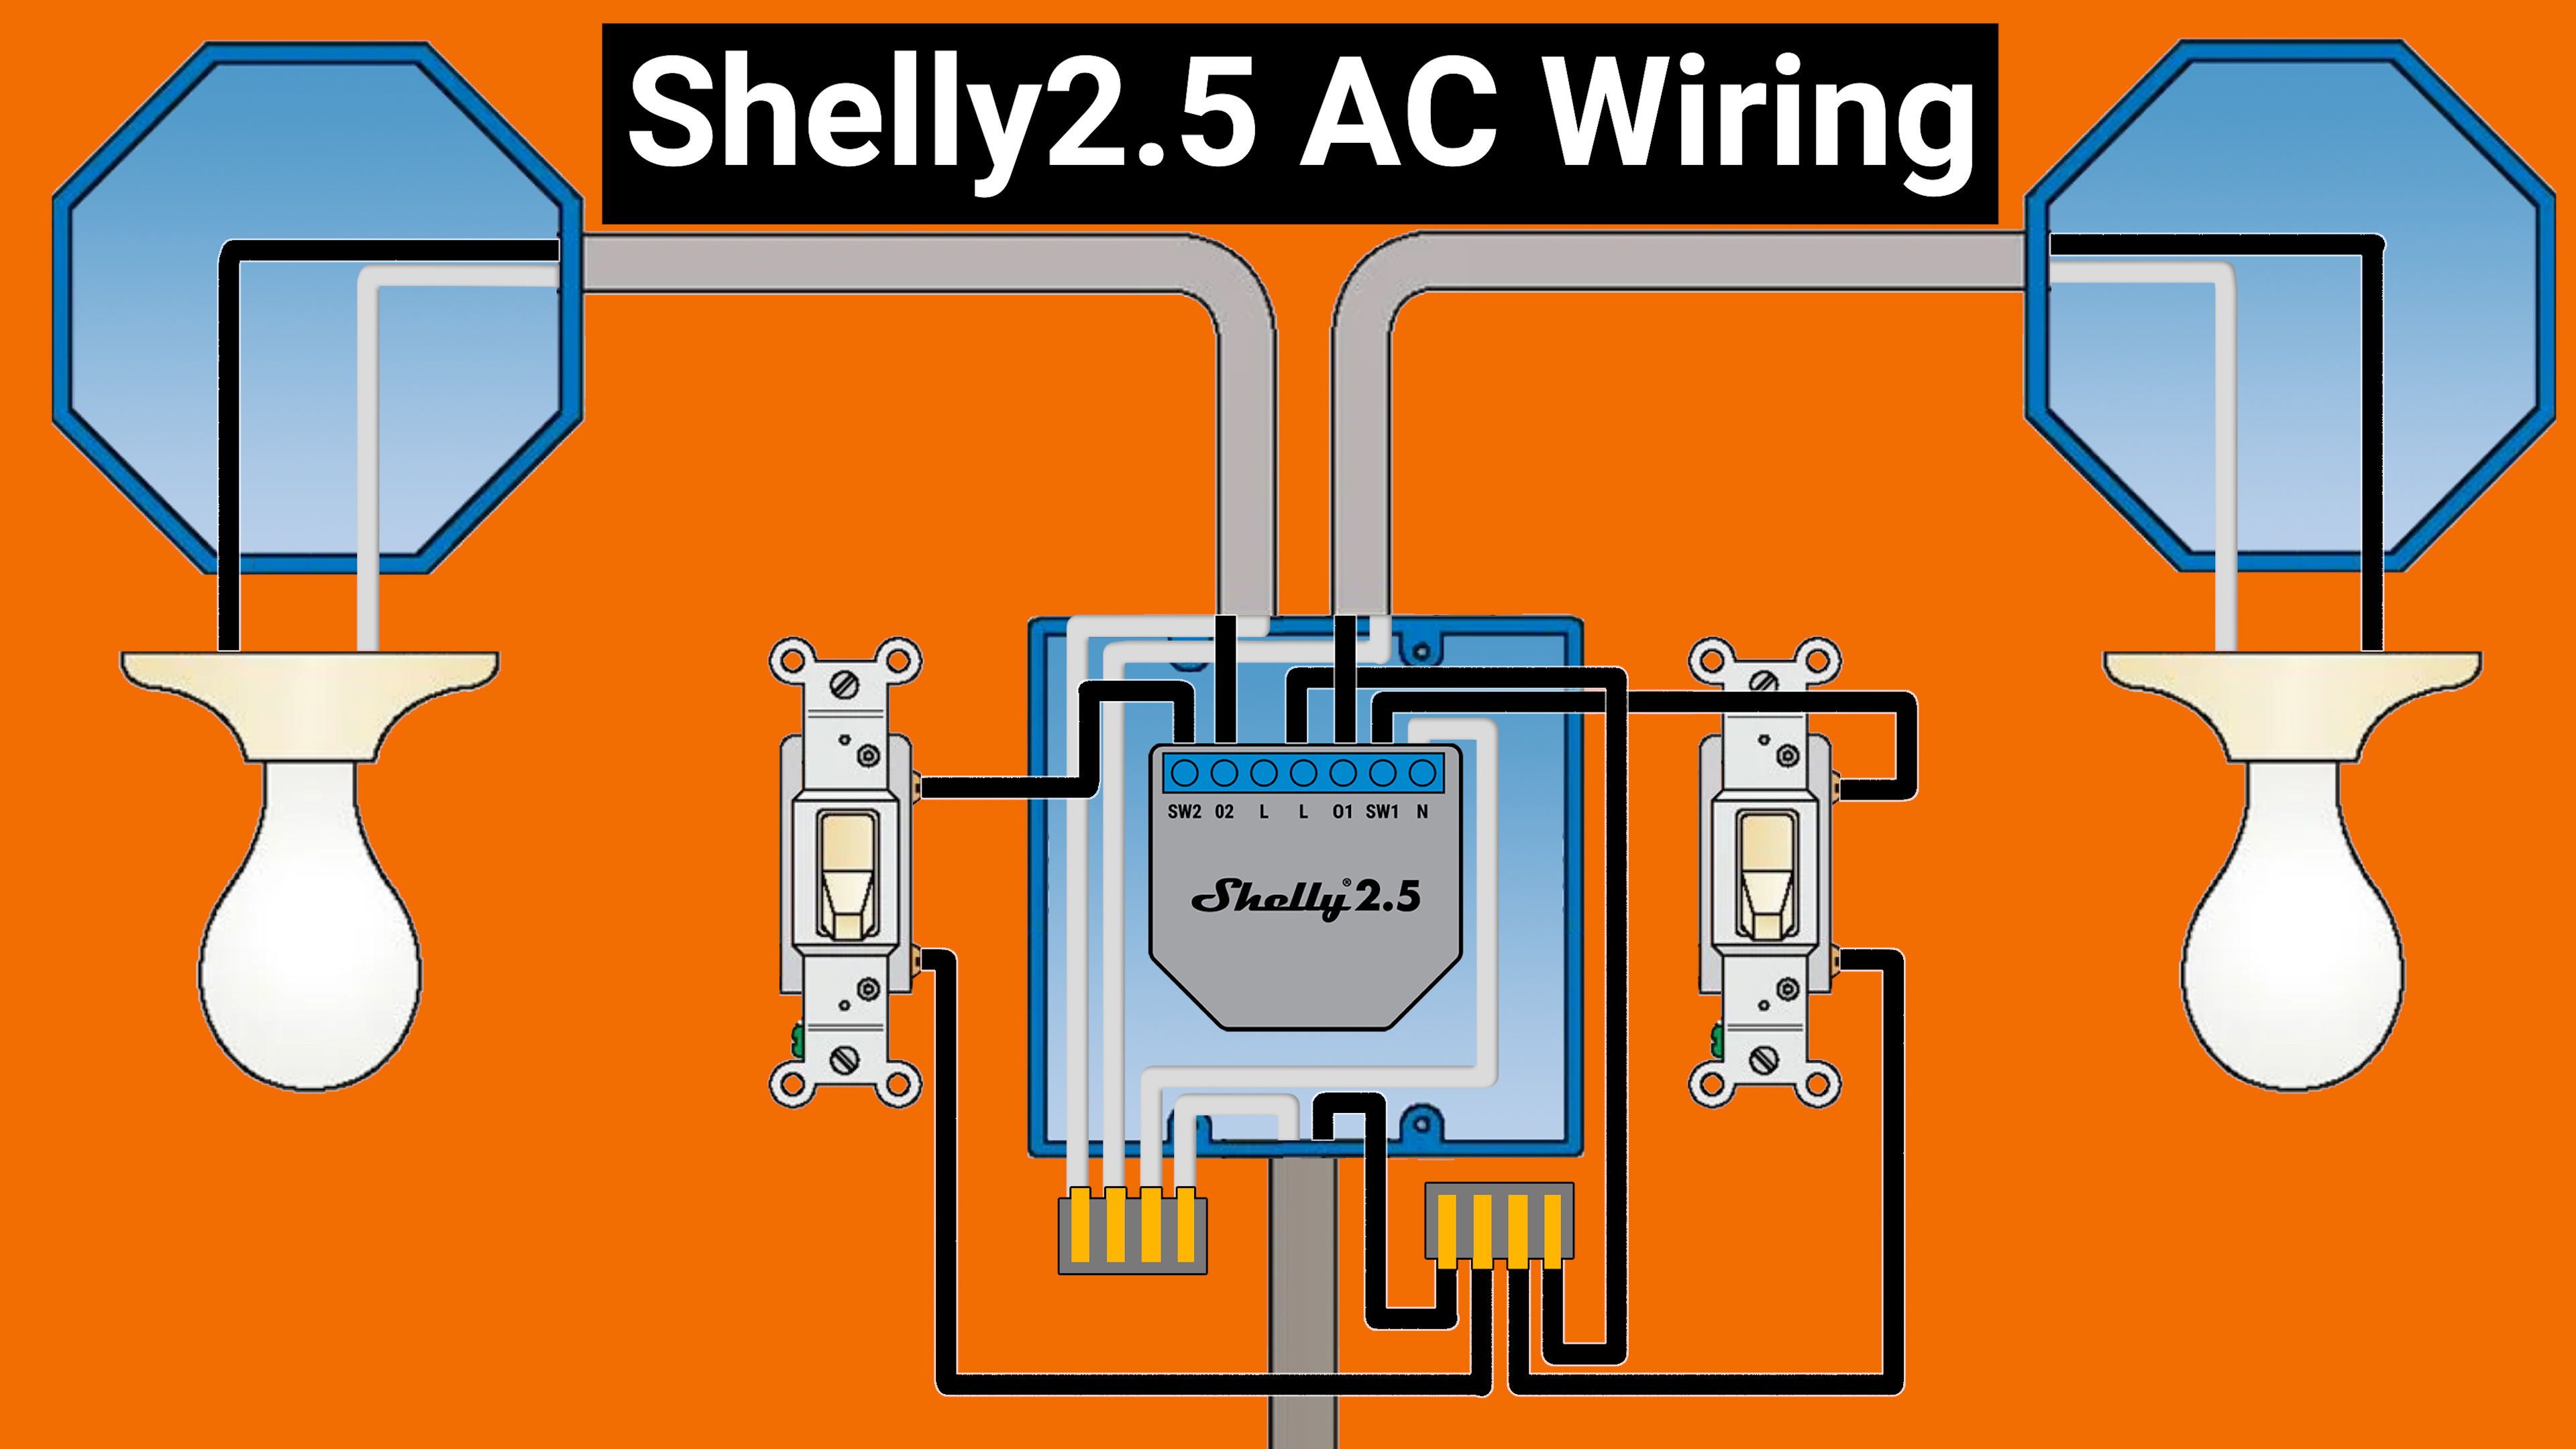 Controlling garage door with shelly 2.5 - Configuration - Home